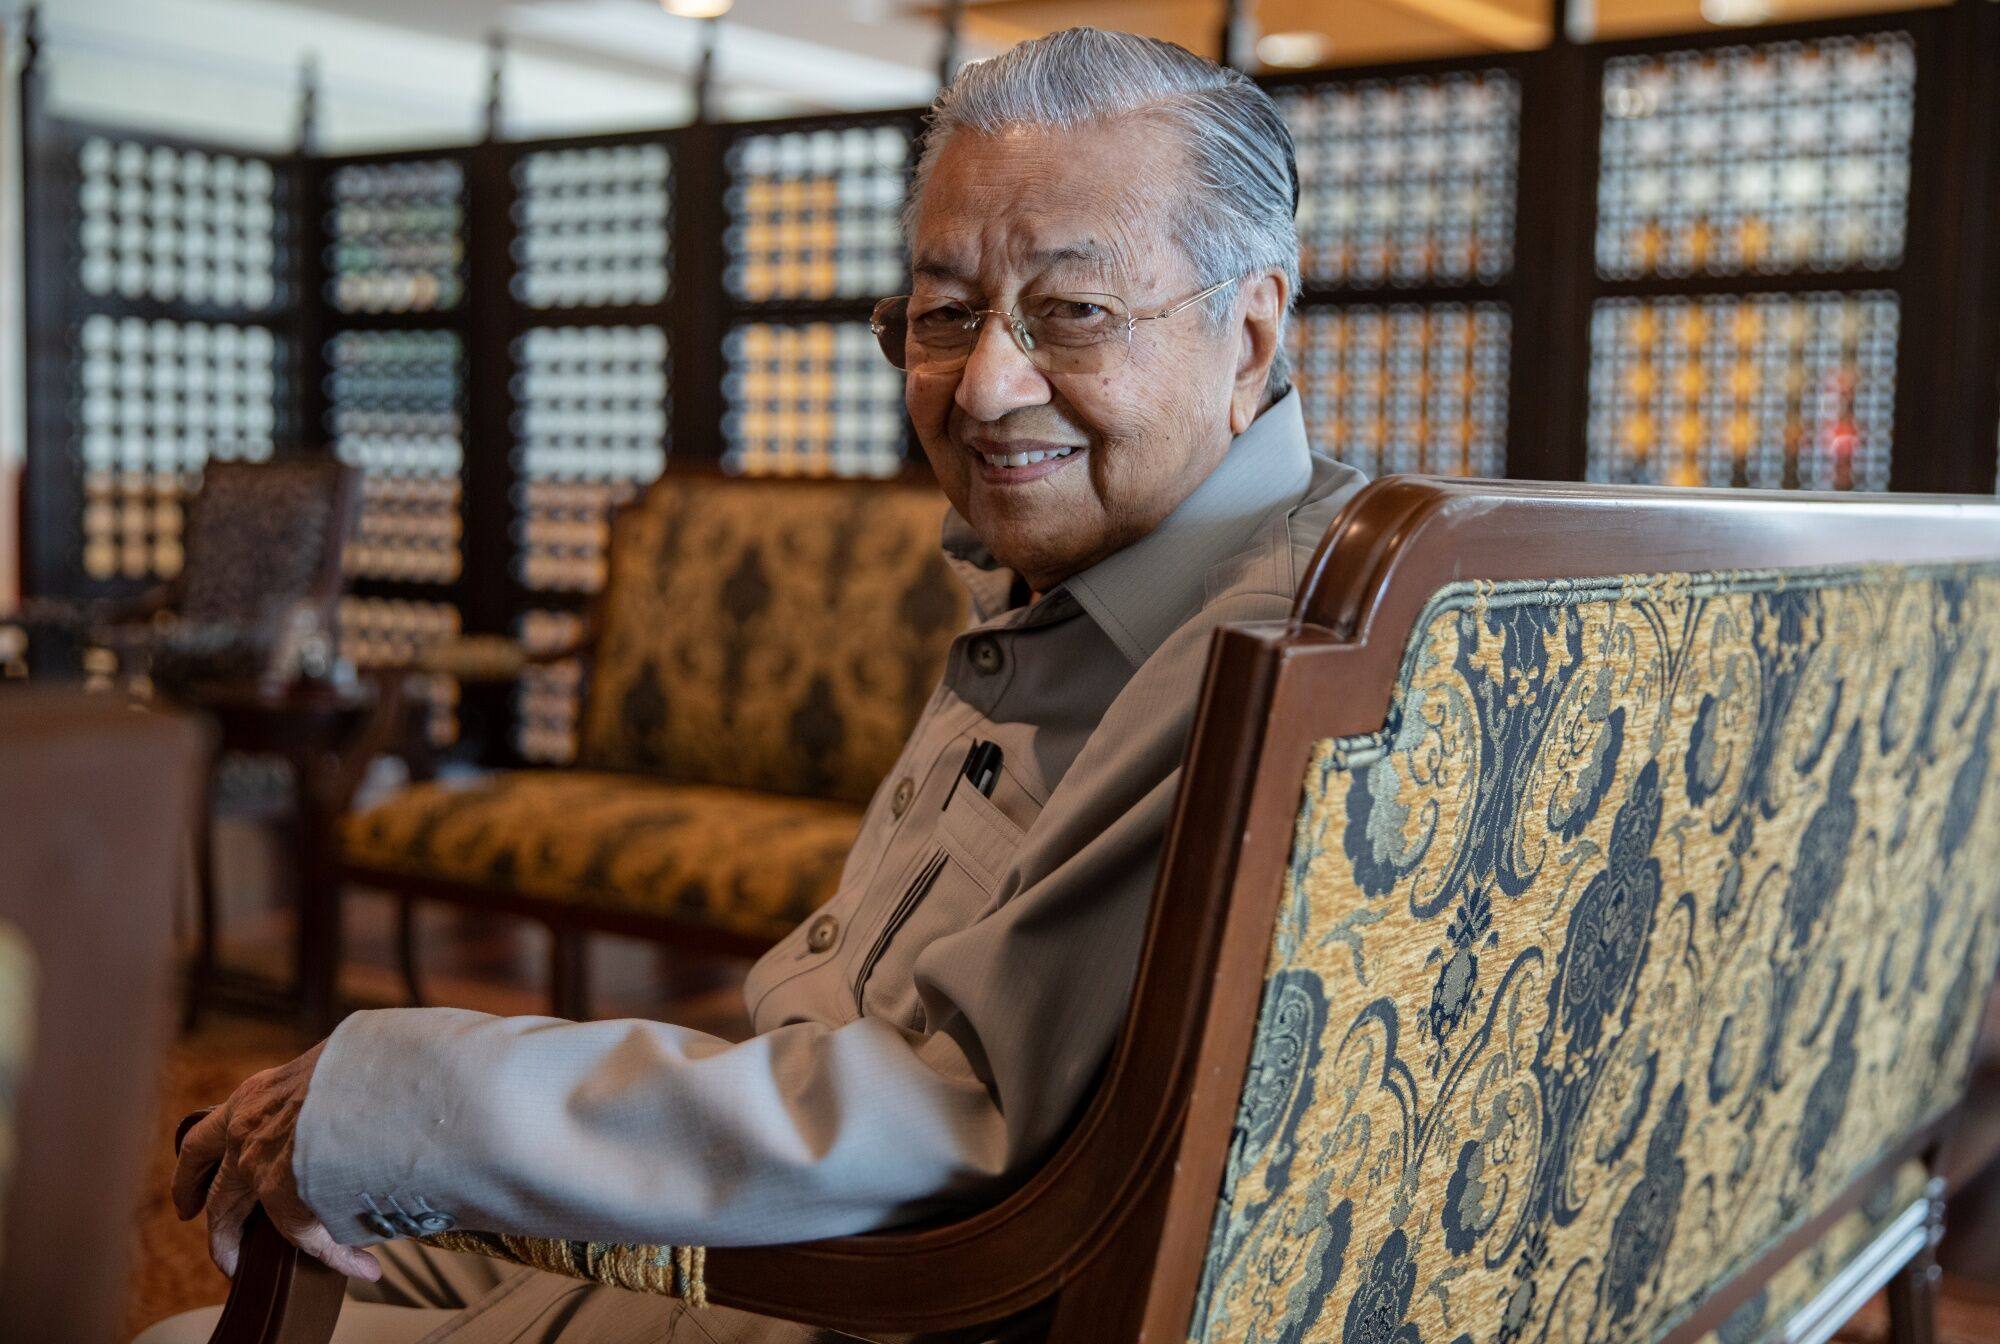 Mahathir Mohamad in Putrajaya. The nonagenarian, who has a history of heart problems, has been in and out of hospital several times in the last few years, suffered several heart attacks and underwent bypass surgery. Photo: Bloomberg